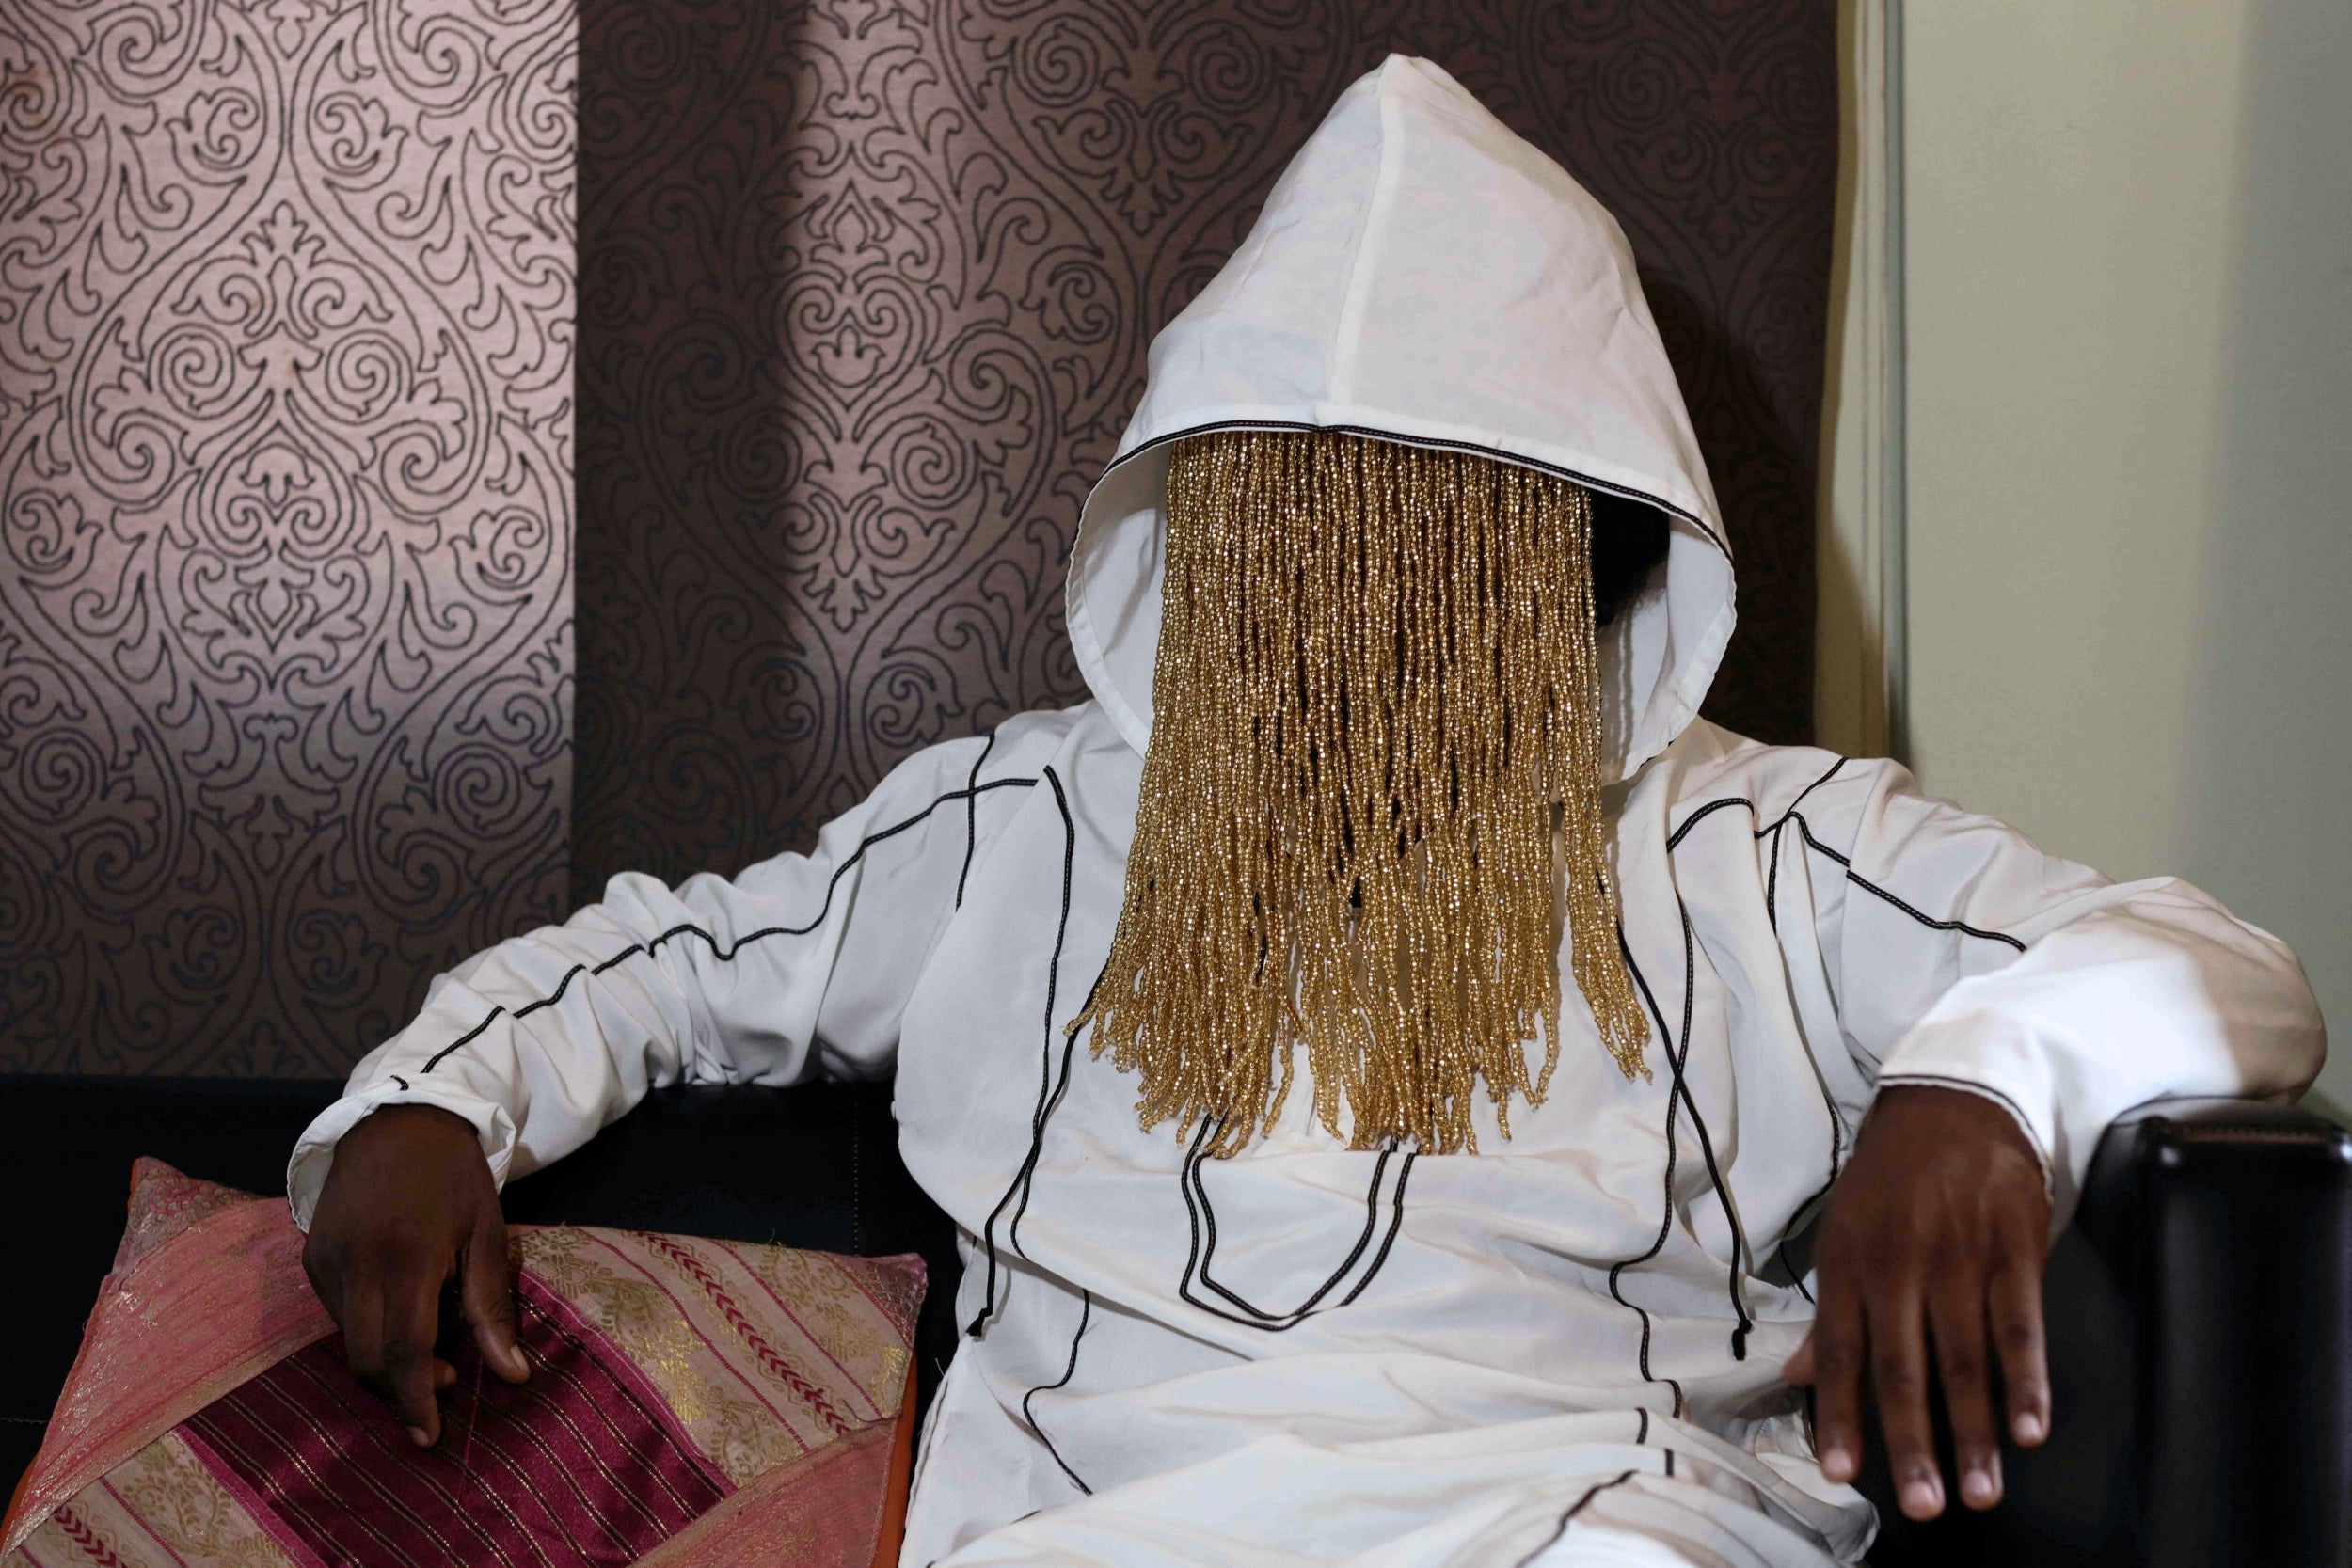 Anas Aremeyaw Anas, whose undercover team Ahmed Husein worked for